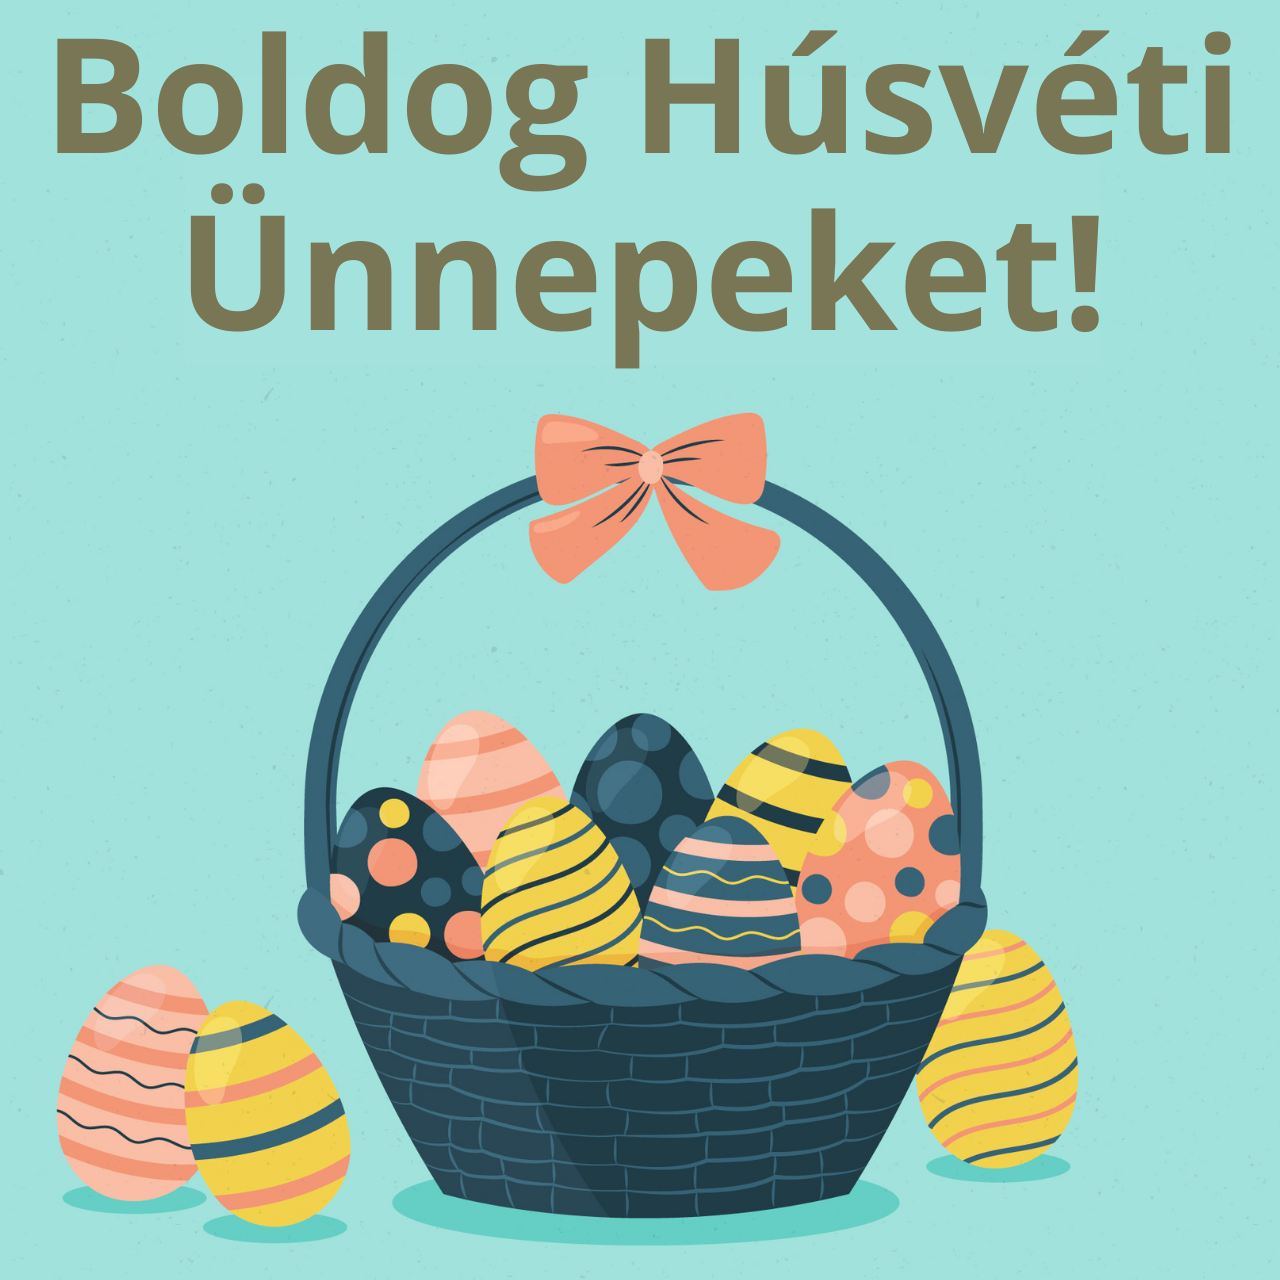 Happy Easter Sunday 2021 Wishes in Hungarian, Images, Quotes, Messages, and Greetings to share on Boldog Húsvéti Ünnepeket